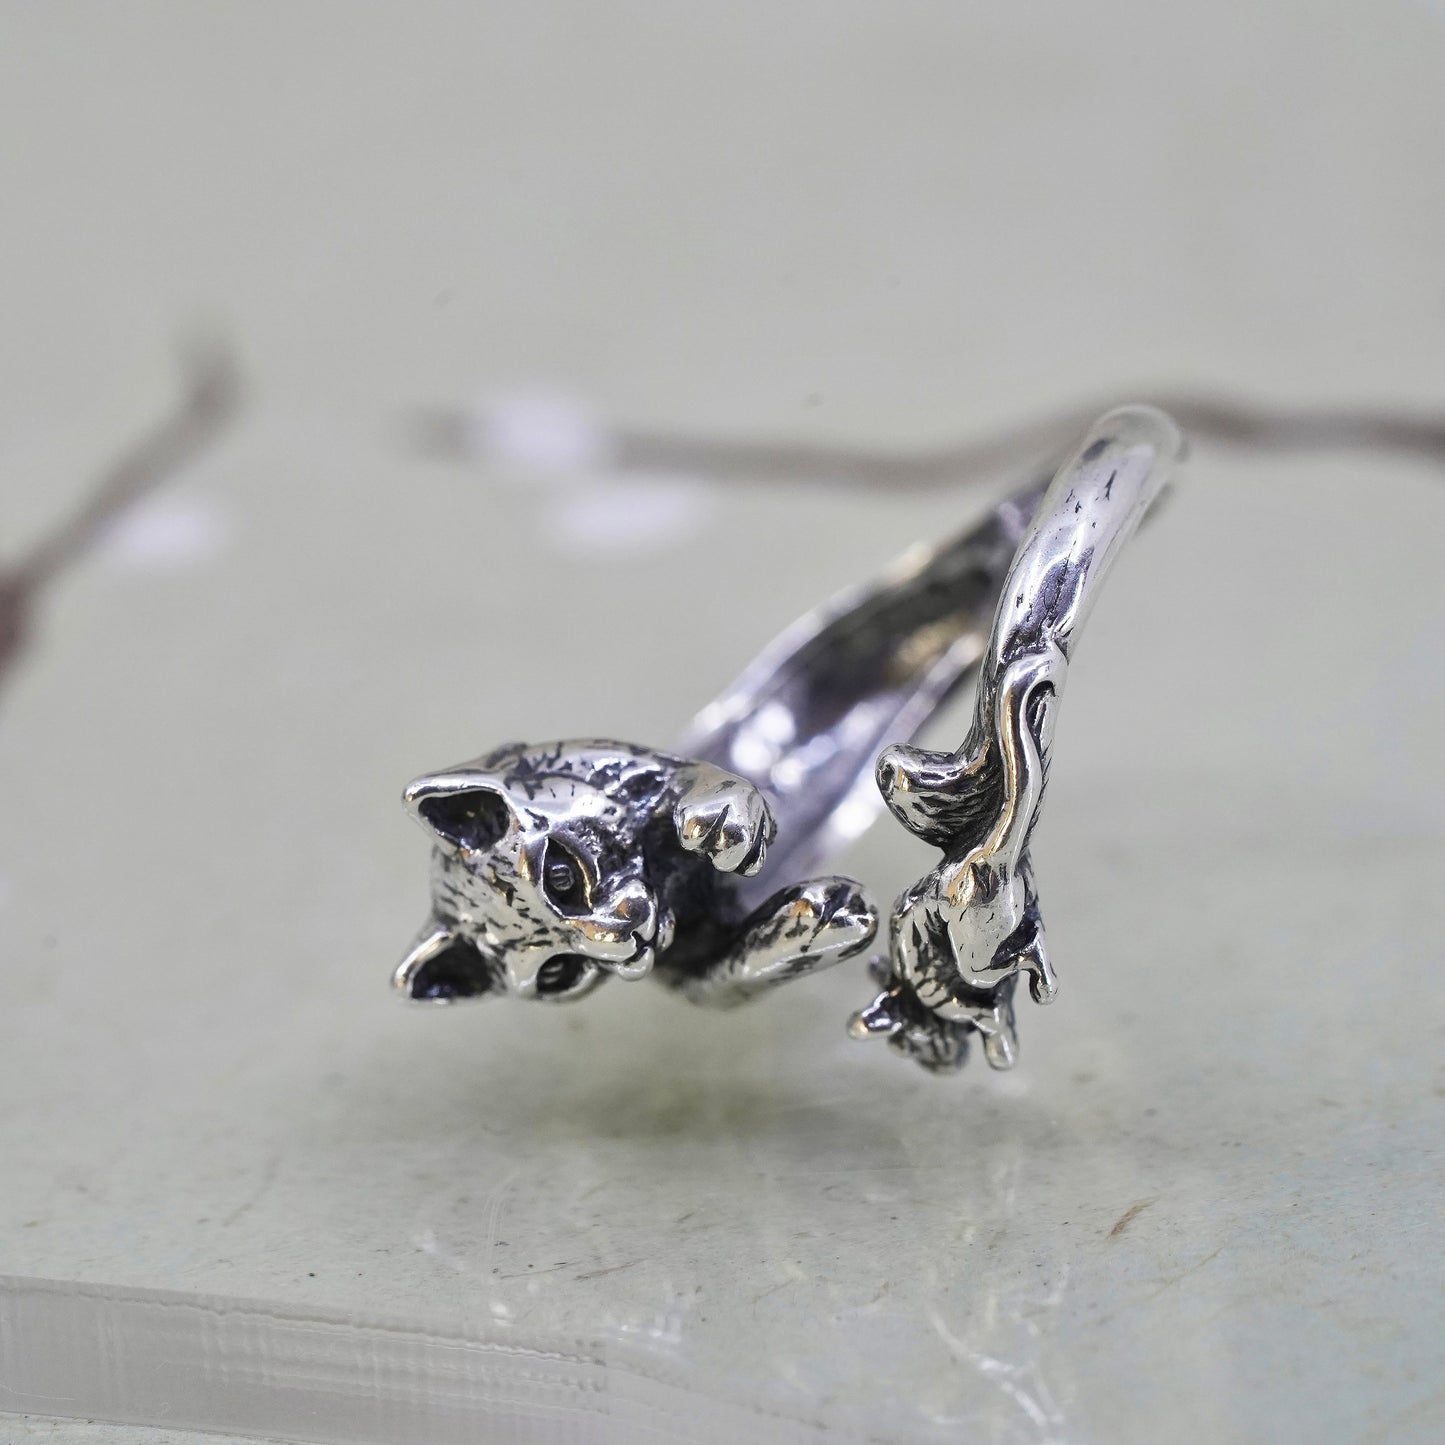 Size 6, vintage sterling silver handmade ring. 925 silver cat rat band